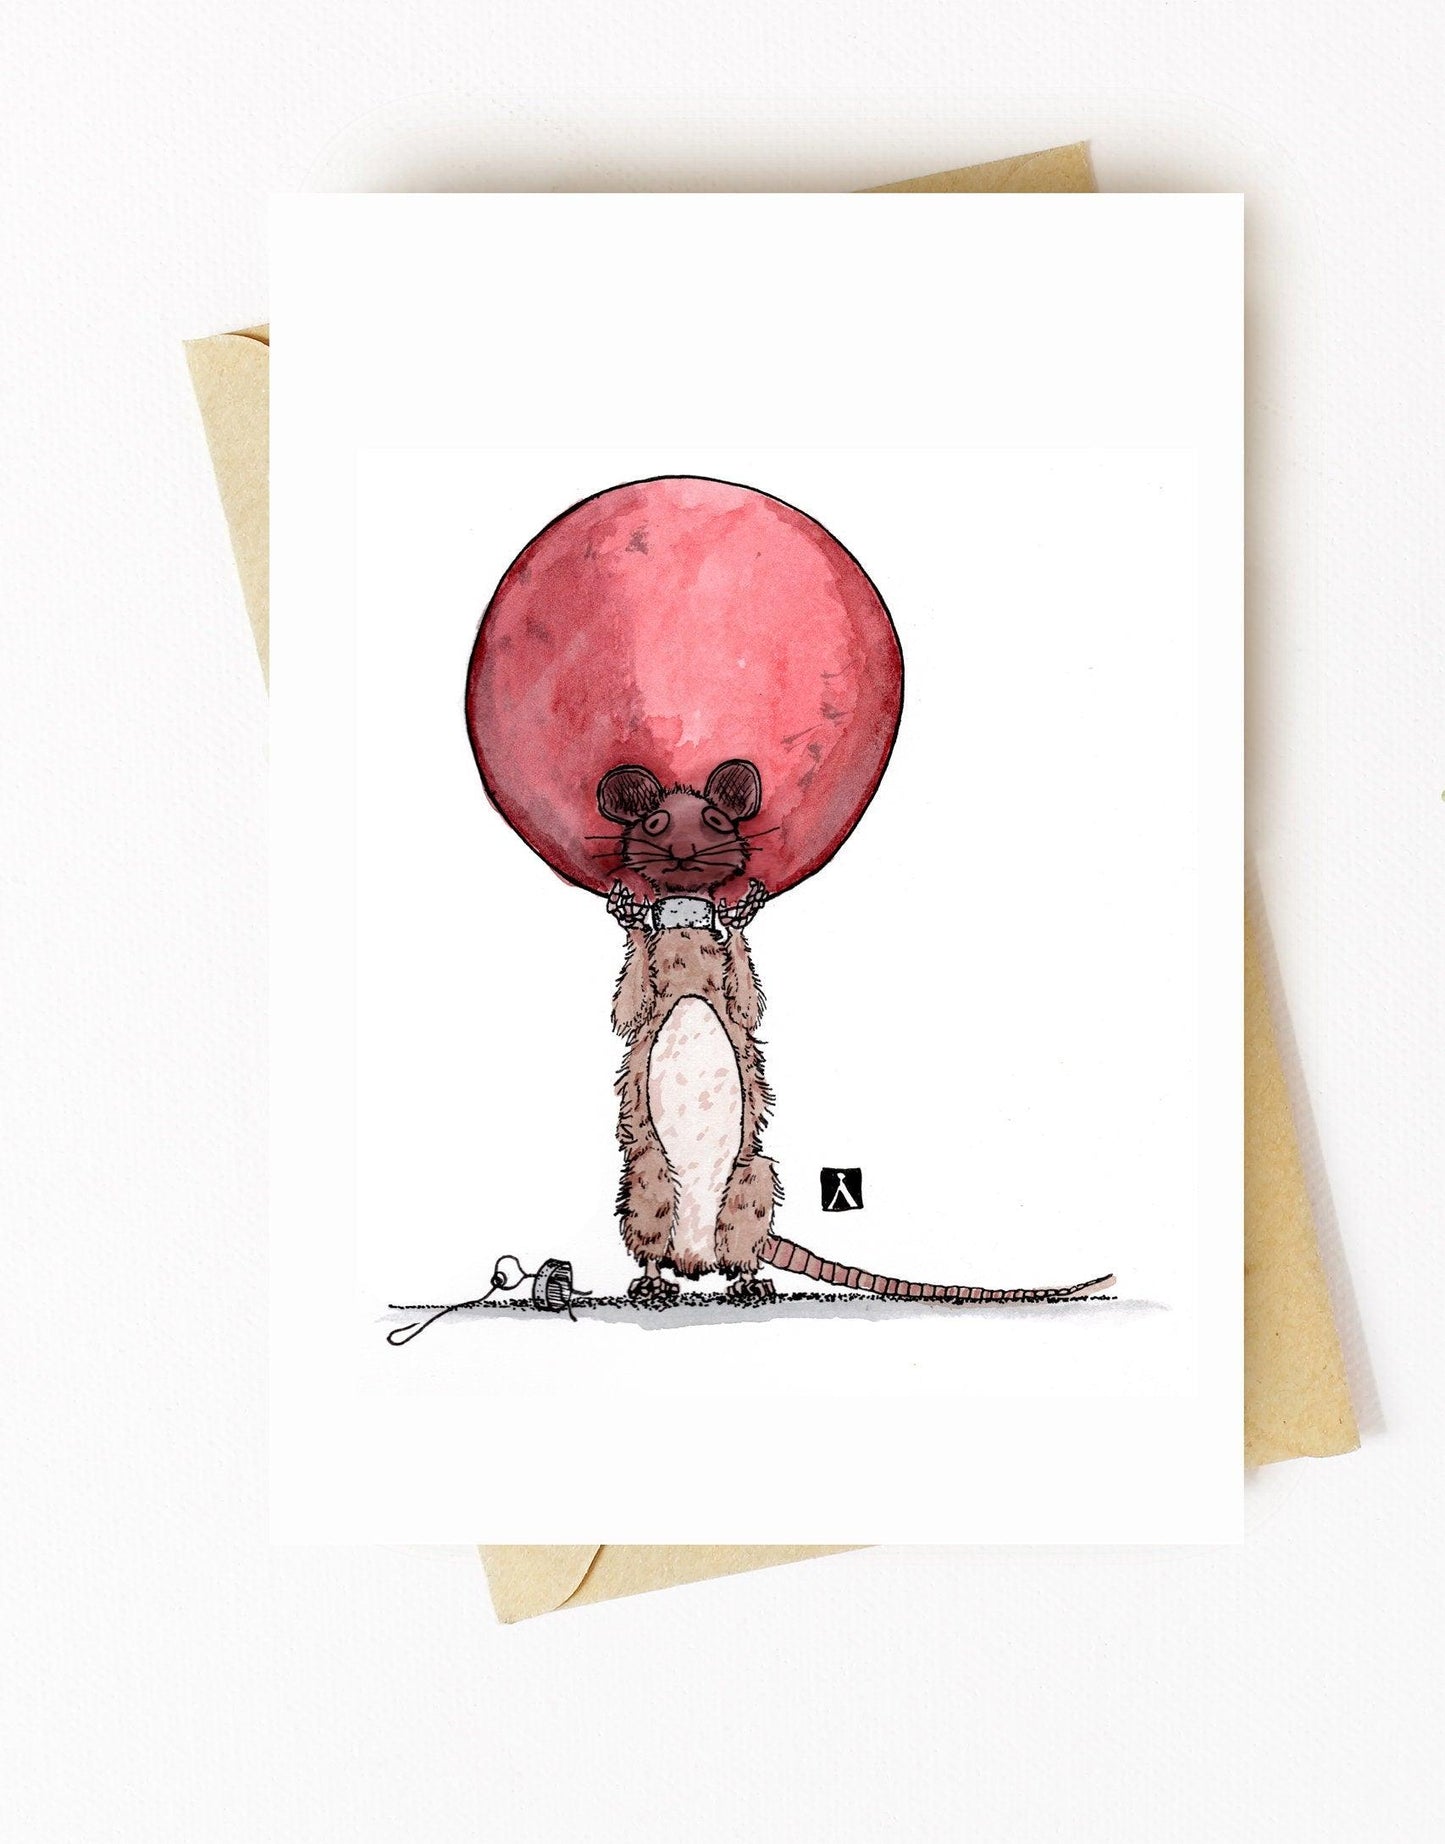 BellavanceInk: Christmas Card With Mouse's Head Stuck In Christmas Bulb Pen & Ink Watercolor Illustration 5 x 7 Inches - BellavanceInk